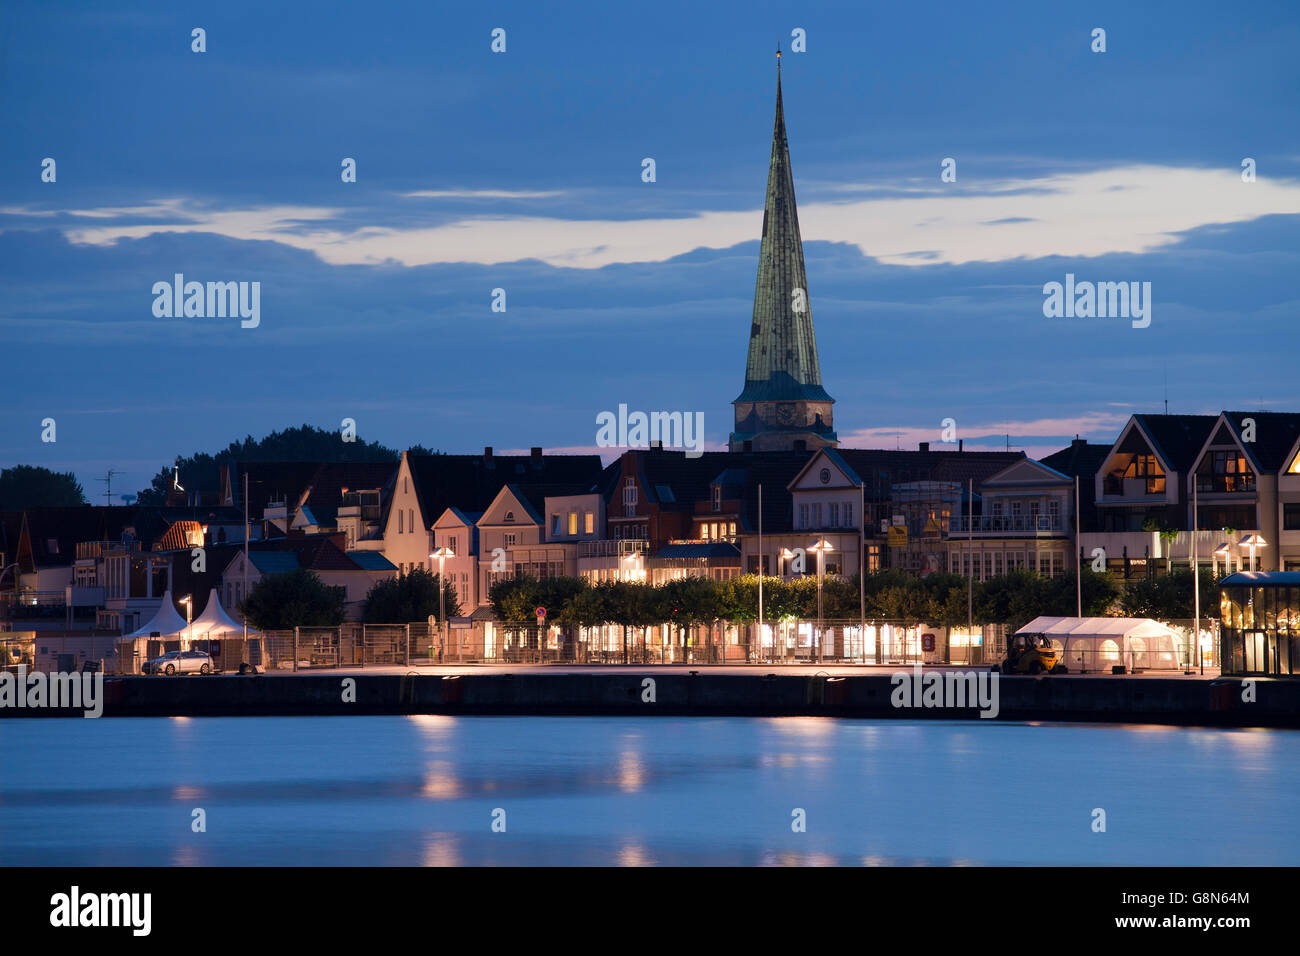 Ostpreußenkai, front row of buildings with St. Lawrence Church, night, blue hour, Baltic coastal resort of Travemuende Stock Photo